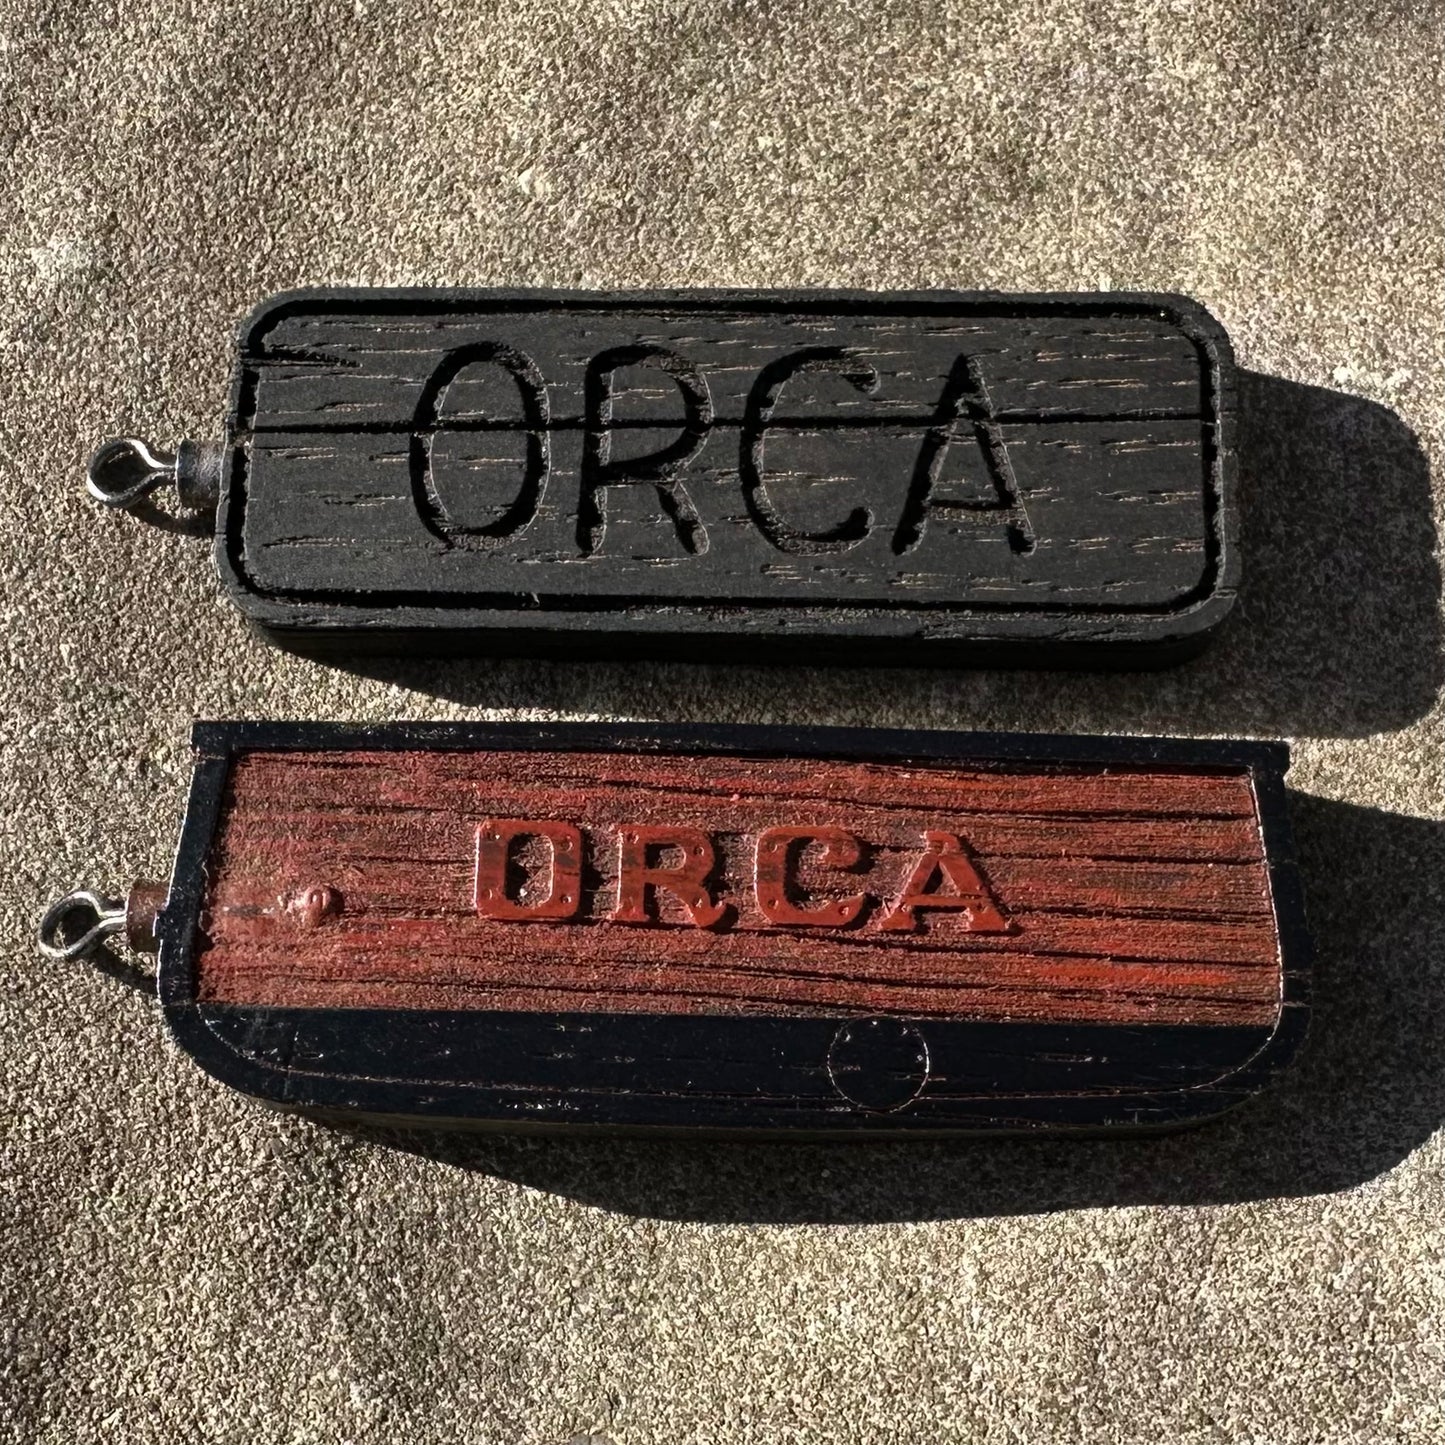 Orca key fob set inspired by JAWS & JAWS 2